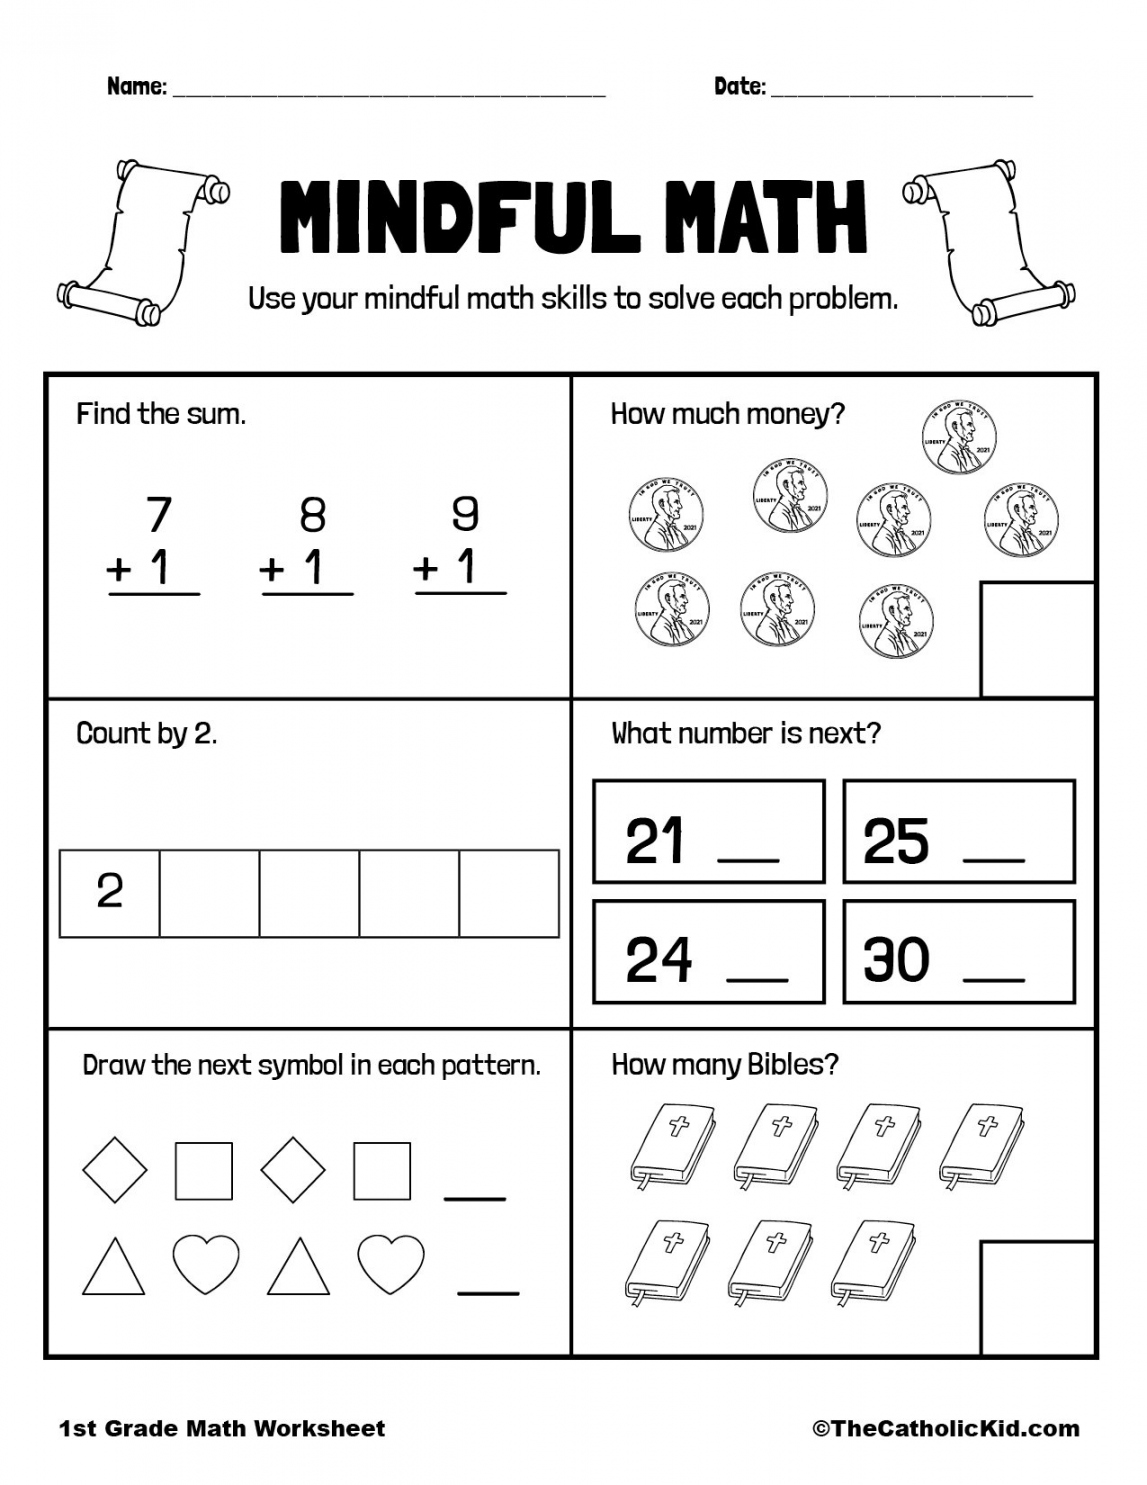 Free Printable Worksheets For First Graders - Printable - Math Review Printable - st Grade Math Worksheet Catholic